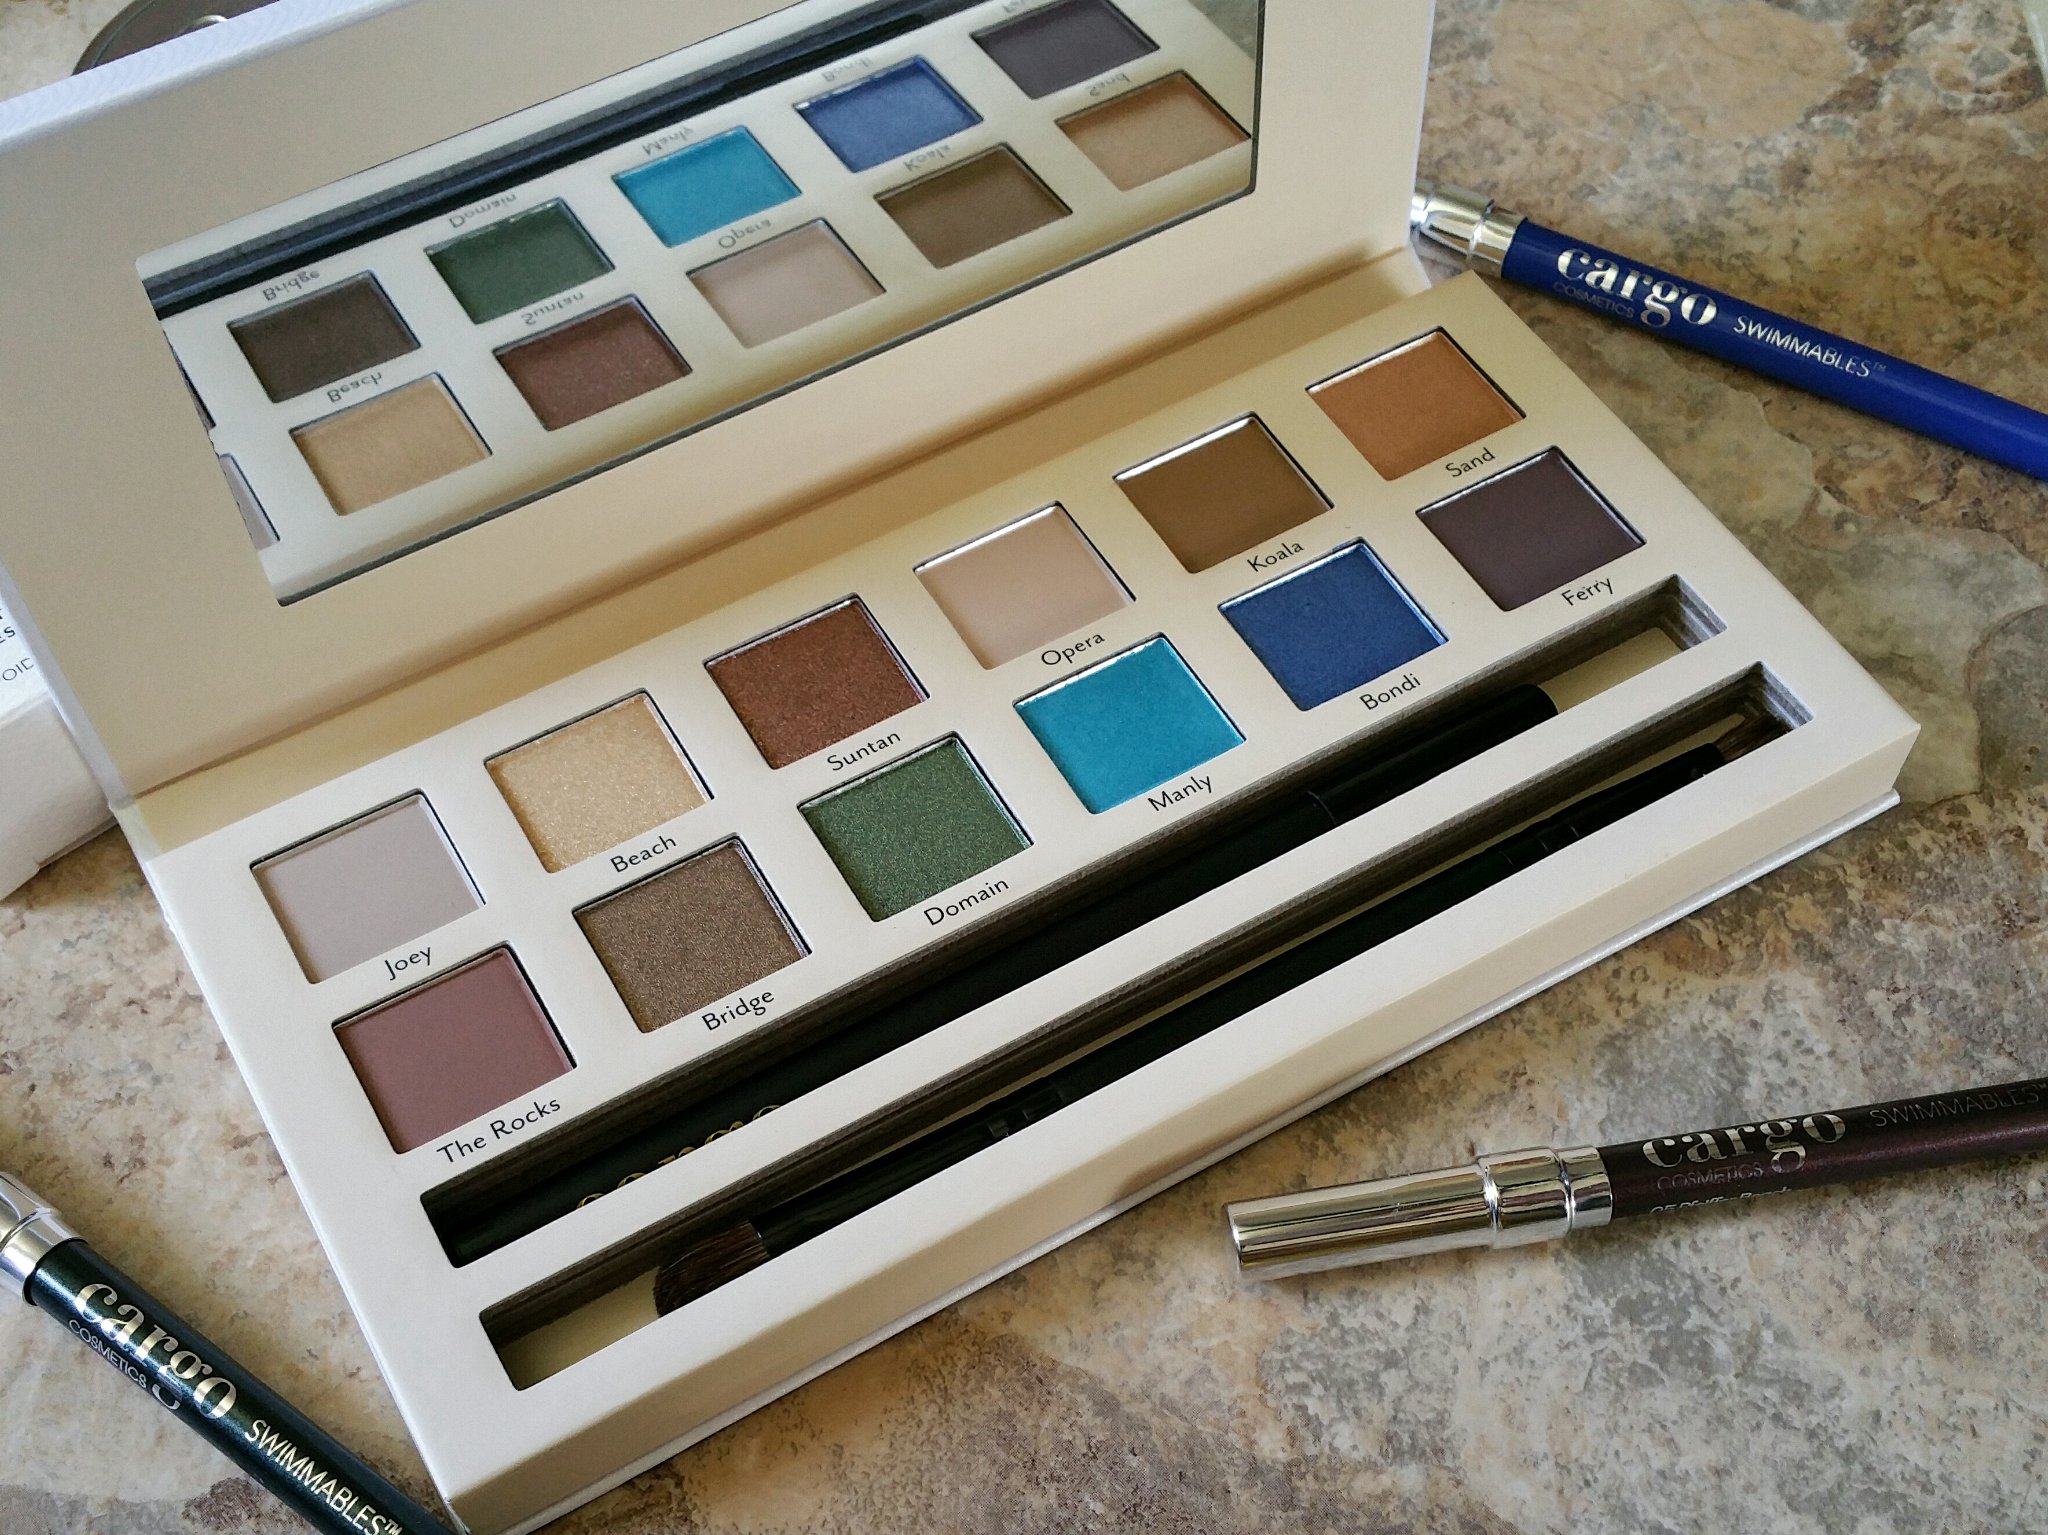 makeup, beauty, eye shadow palette, eye shadow, makeup palette, Cargo cosmetics, Cargo Land down under palette, land down under eye shadow palette, palette, makeup lover, pigmented shadows, swatches, review, eye shadow review,